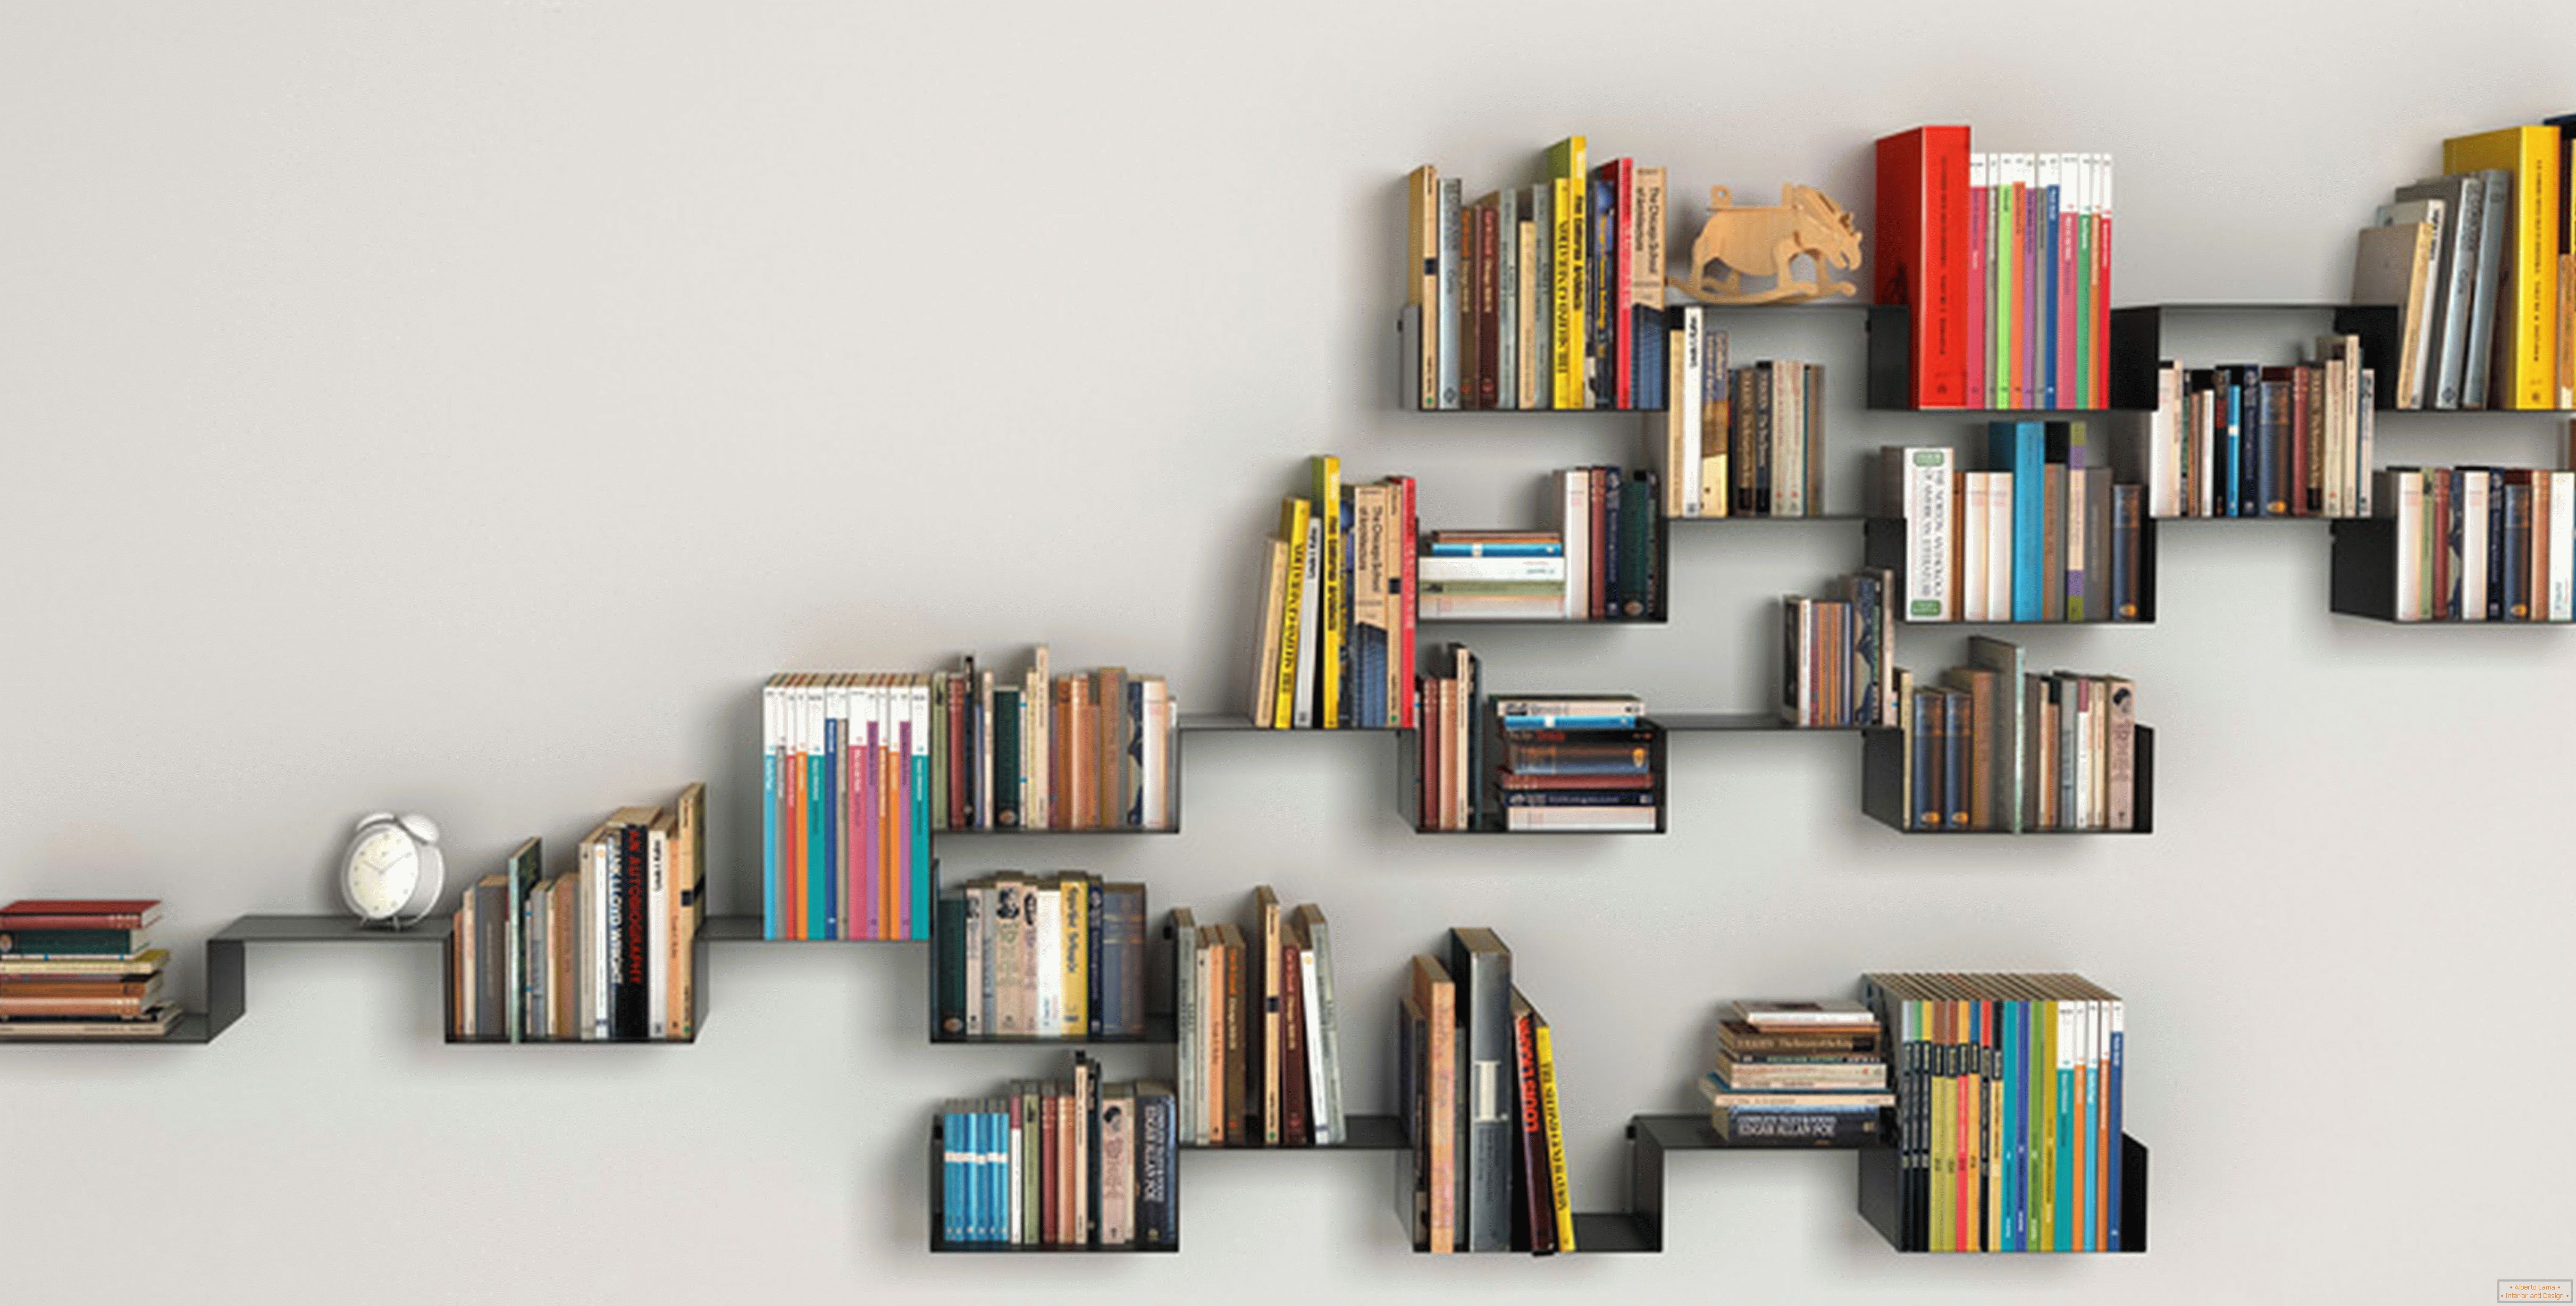 Bookshelf in the form of a map